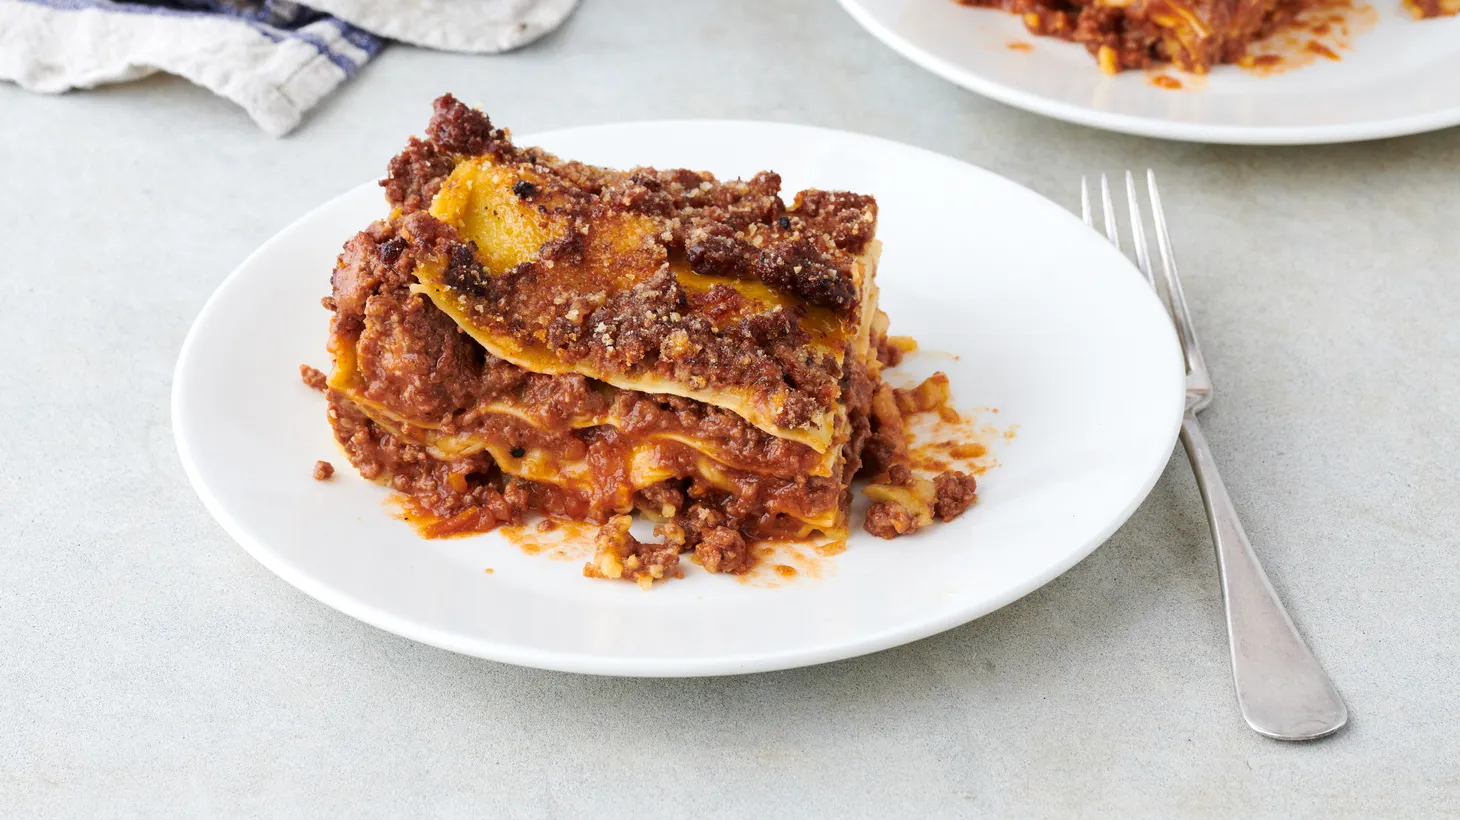 A dairy-free lasagna is perfect for keeping kosher by using a broth instead of milk in a bechamel, and pasta sheets made of matzah.